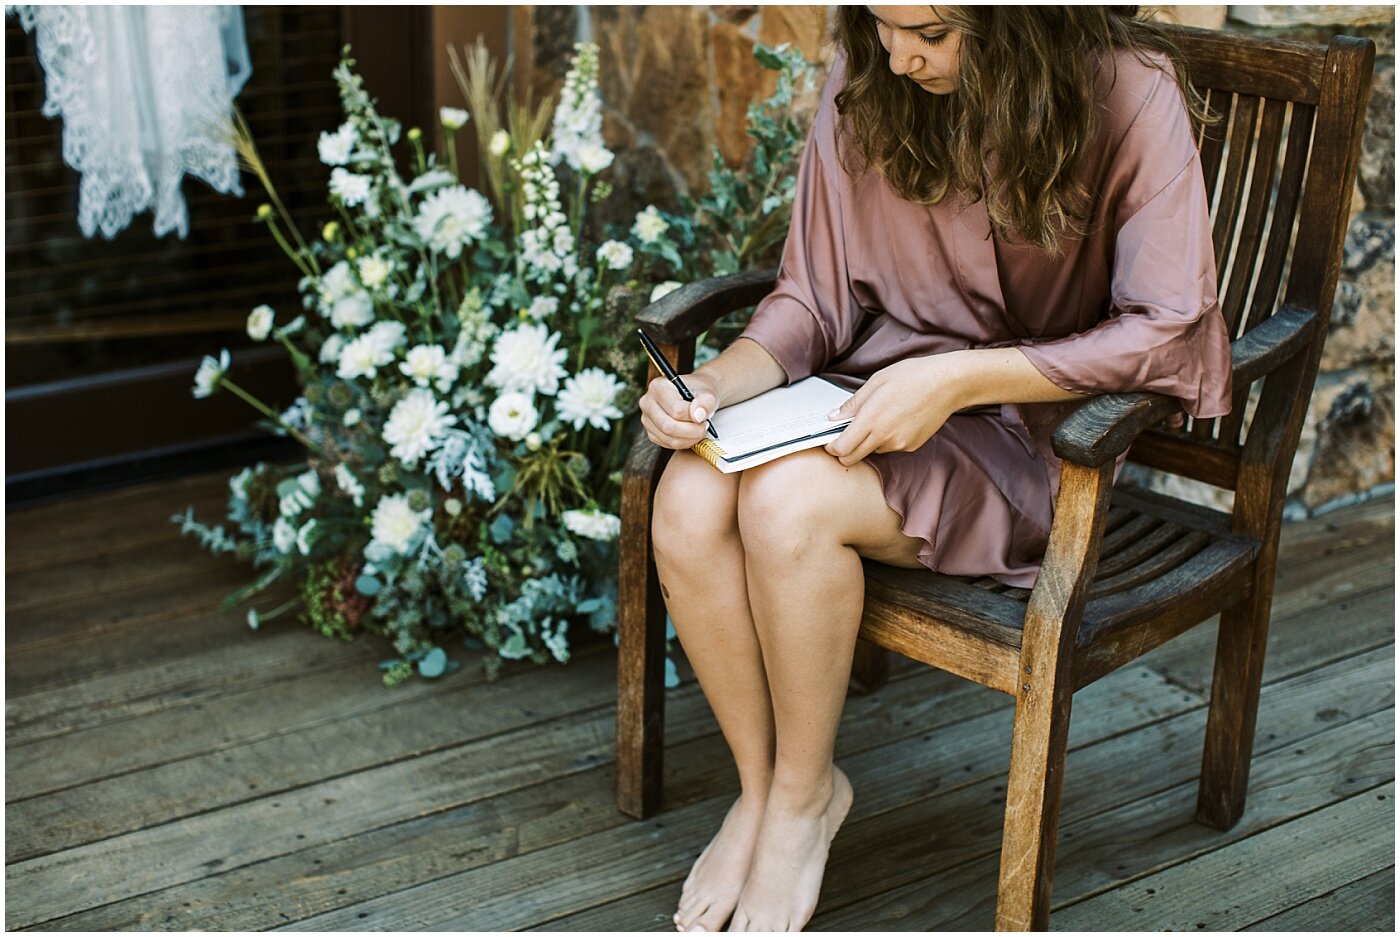 elopement planning 101 - creating a timeline - ruthanne z - lake tahoe elopement photographer_0002.jpg